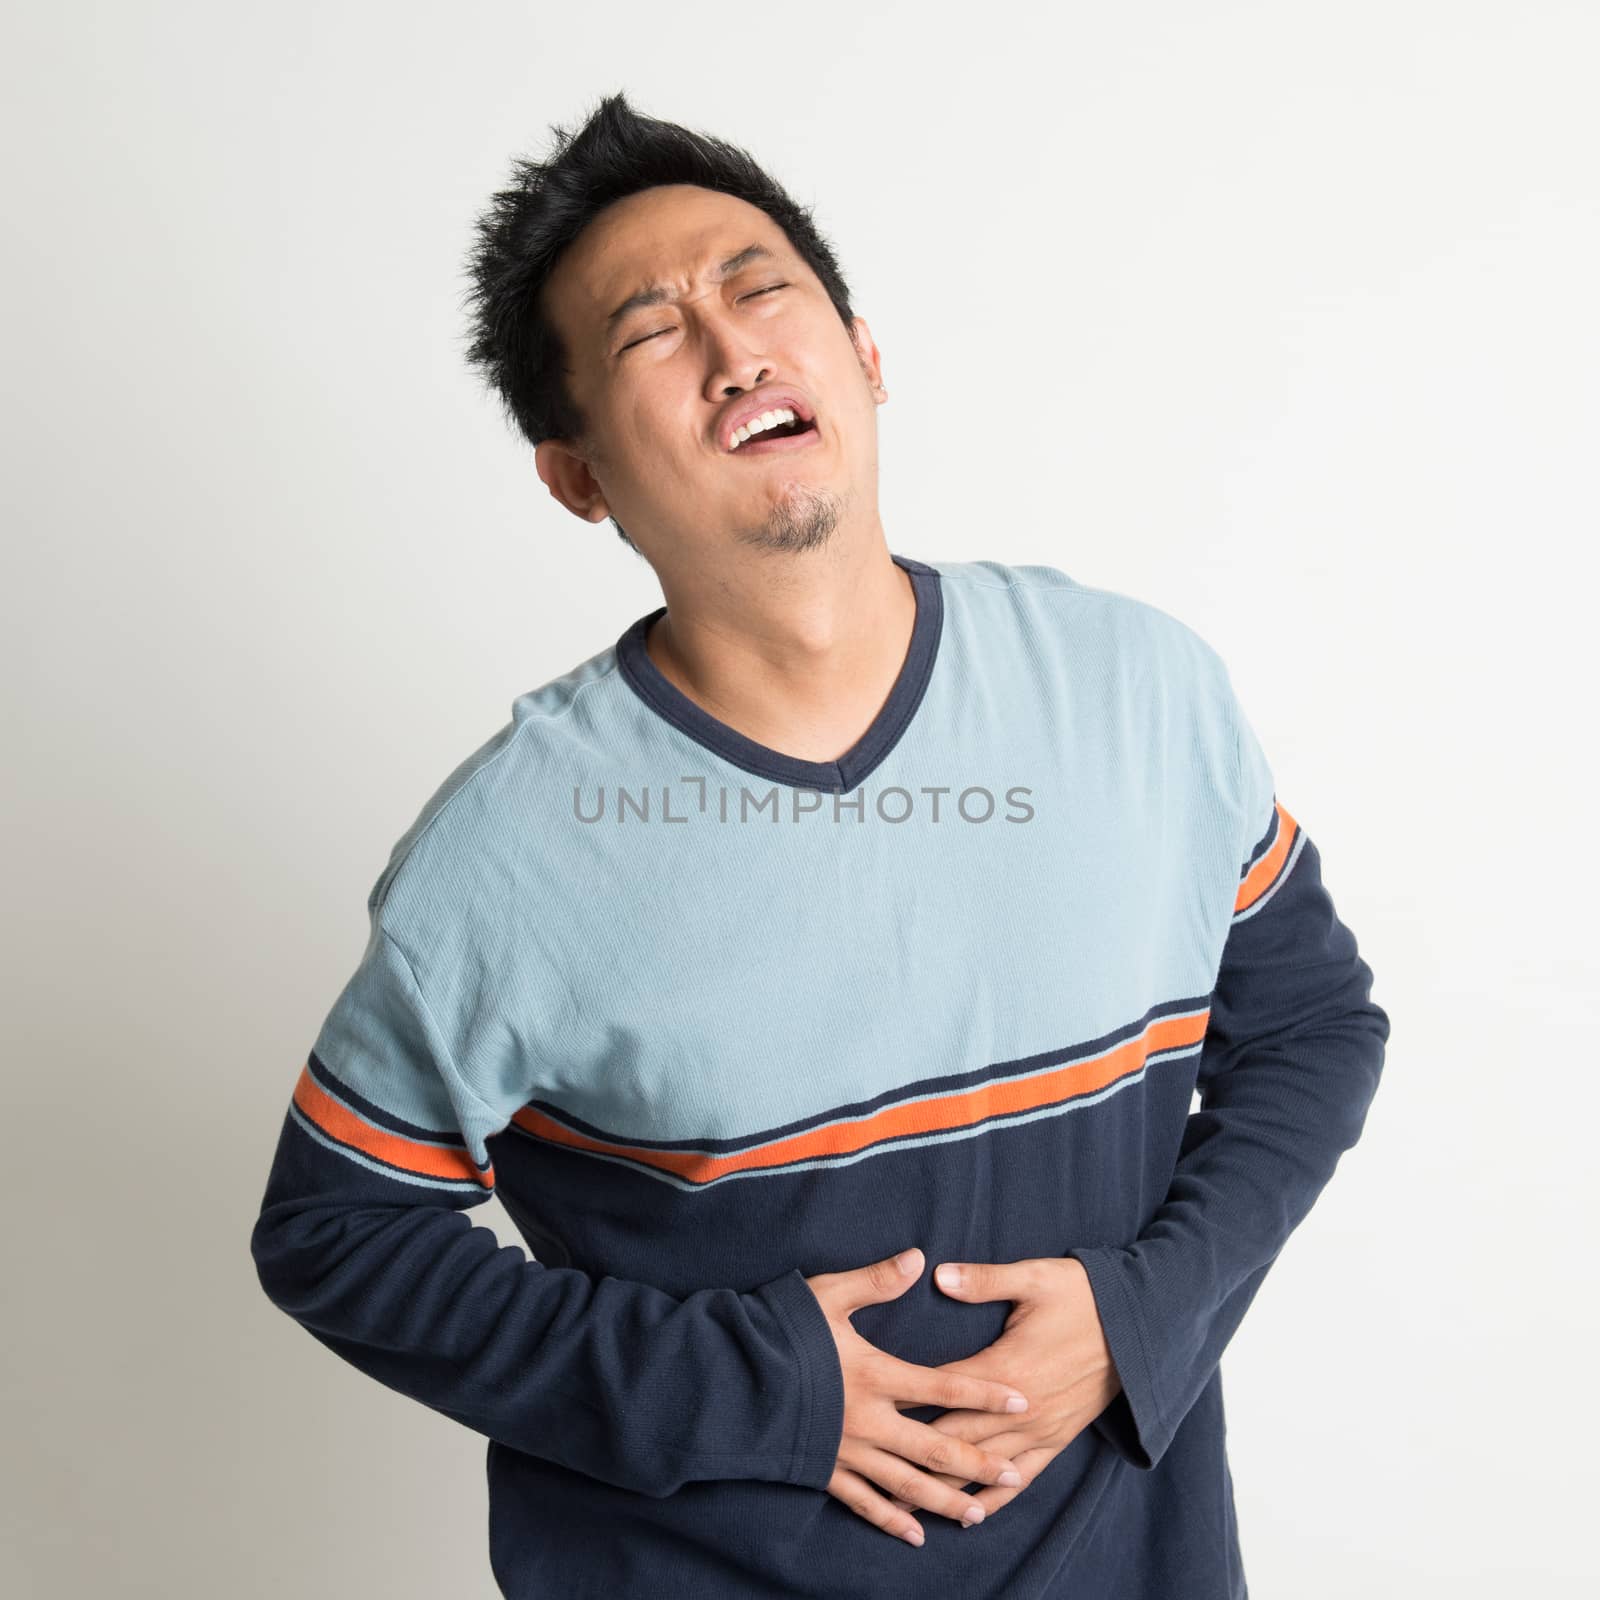 Asian male stomach pain, with painful face expression, on plain background